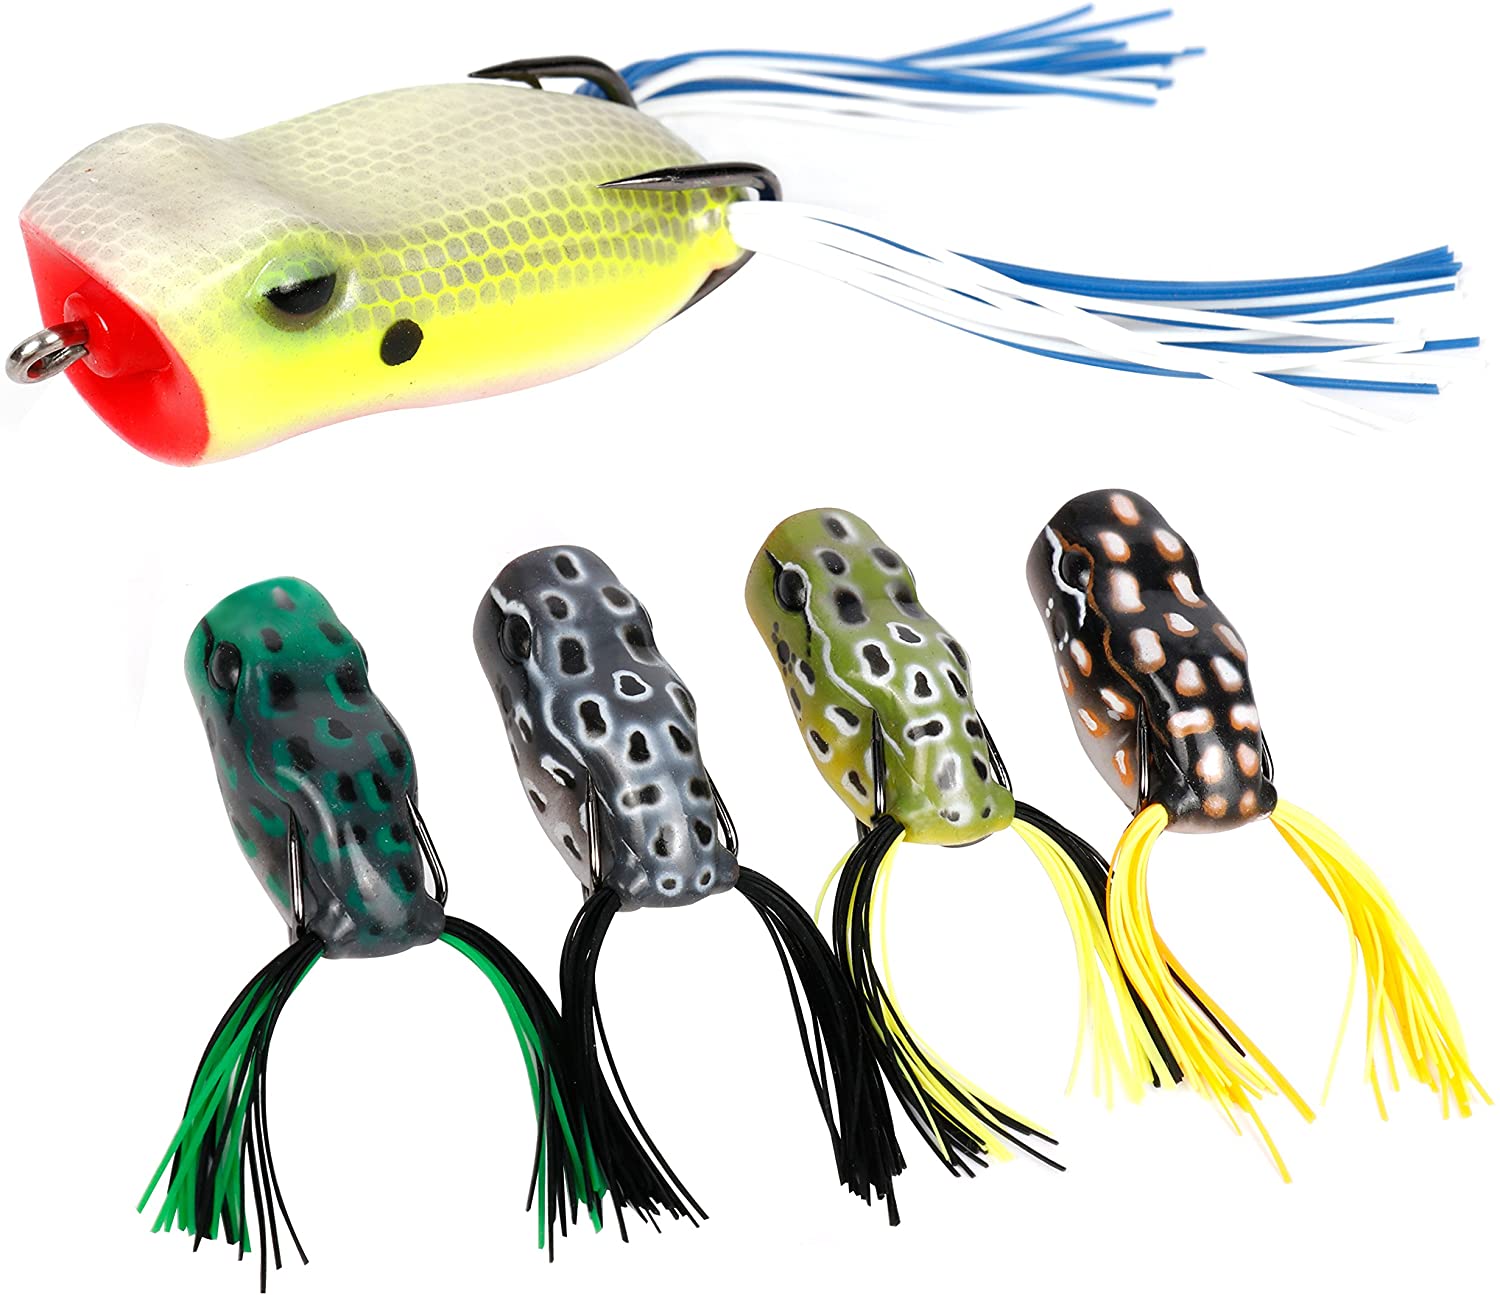 Wholesale 3cm frog lure-Buy Best 3cm frog lure lots from China 3cm frog lure  wholesalers Online